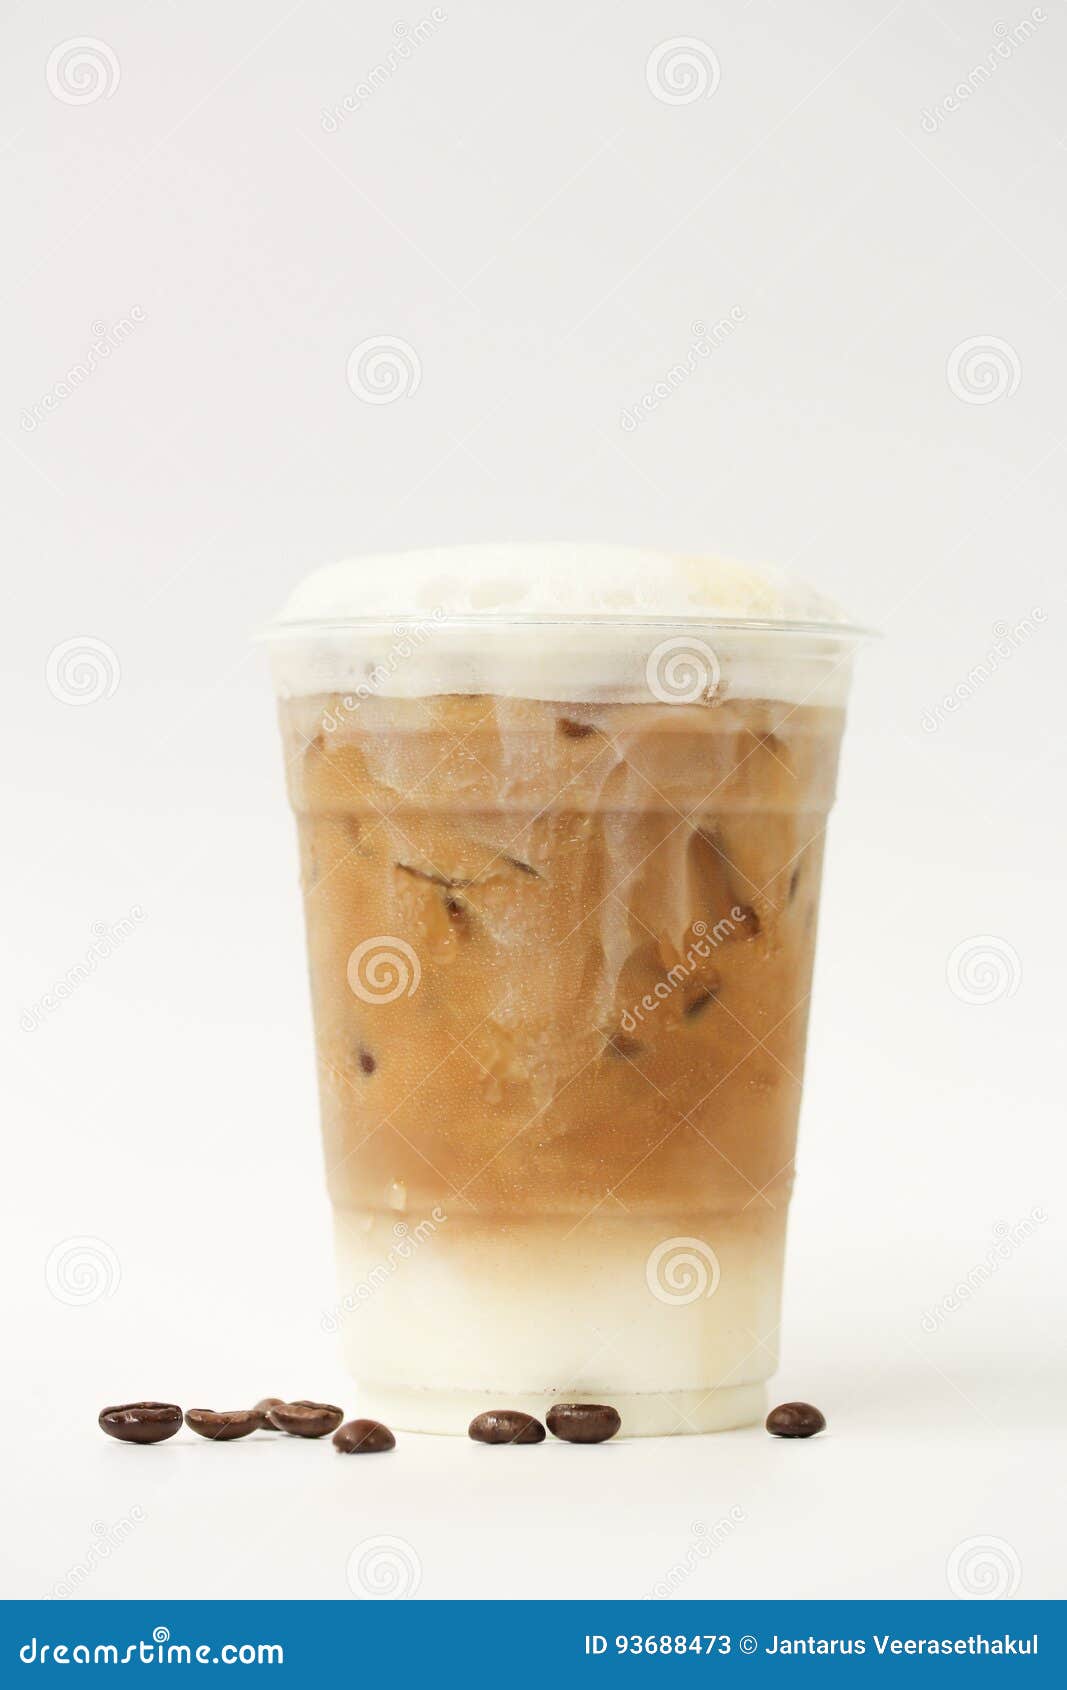 Iced Coffee Latte In Takeaway Cup Isolated On White Background Stock Photo  - Download Image Now - iStock